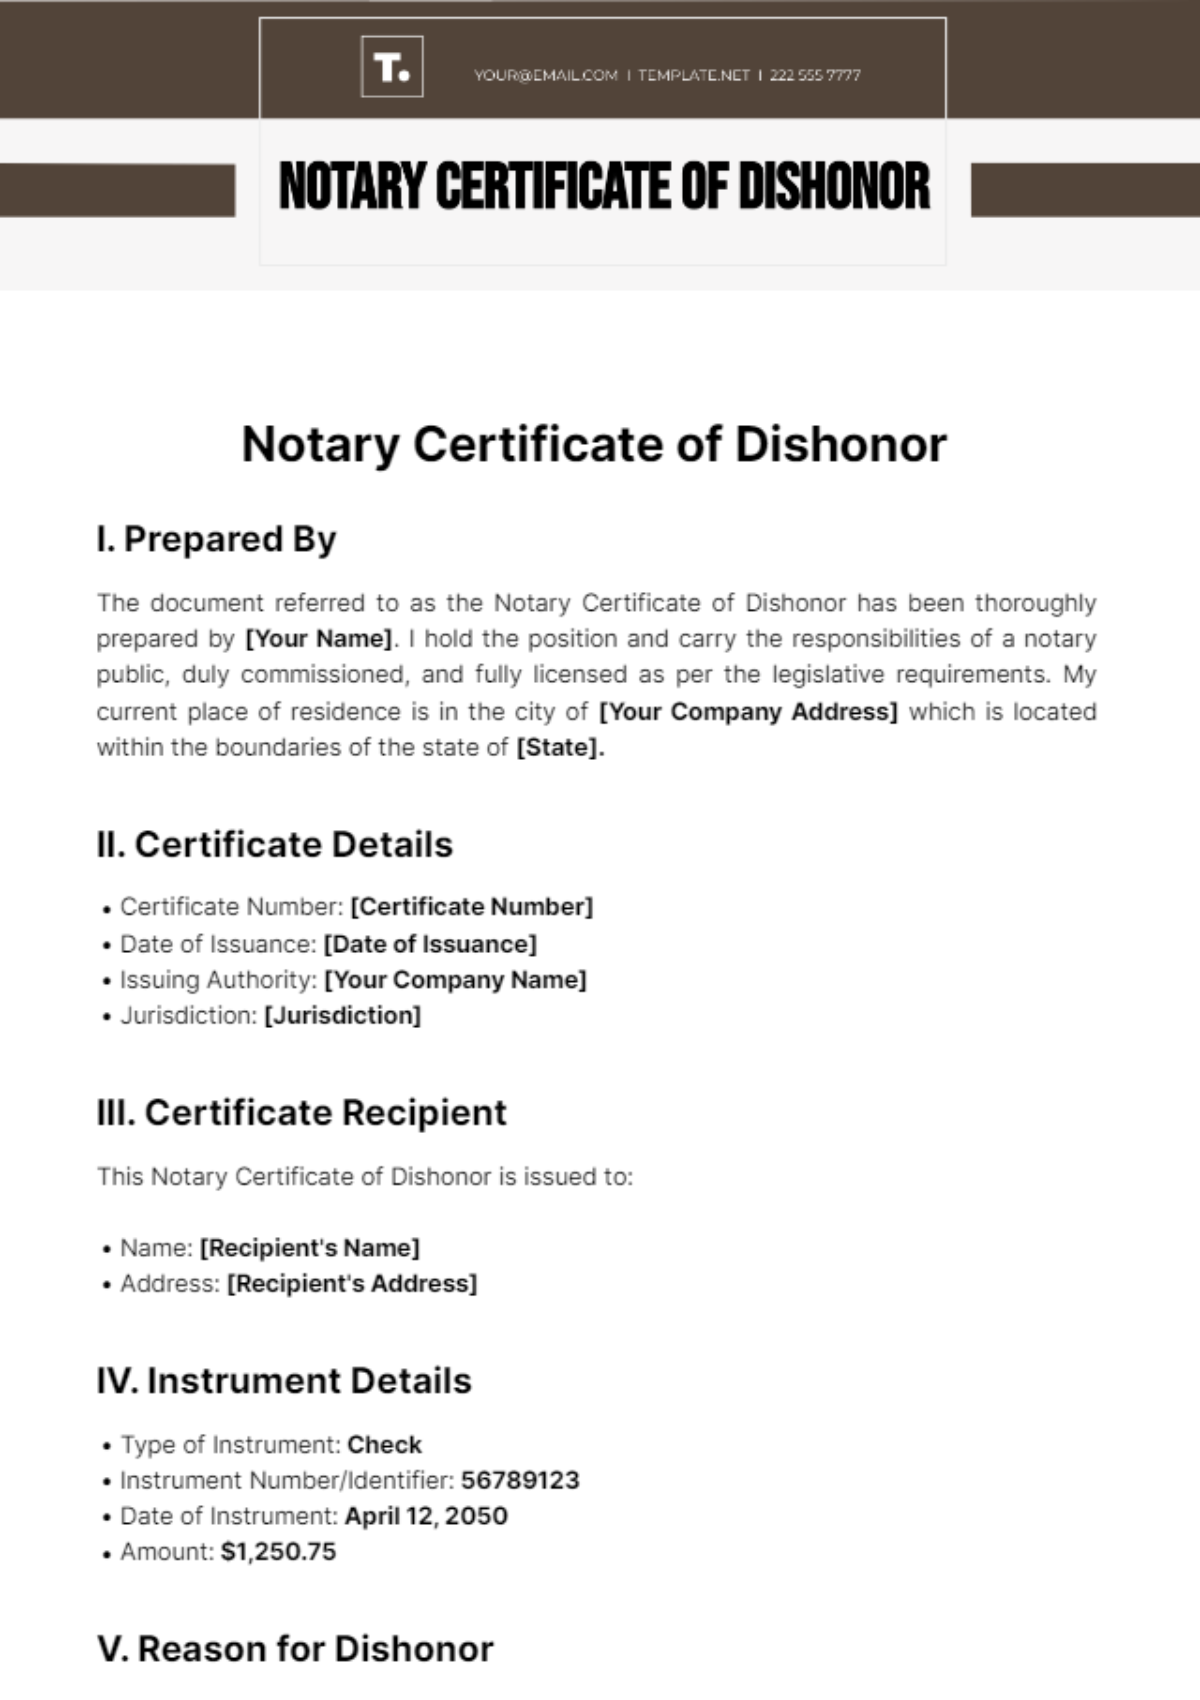 Free Notary Certificate Of Dishonor Template